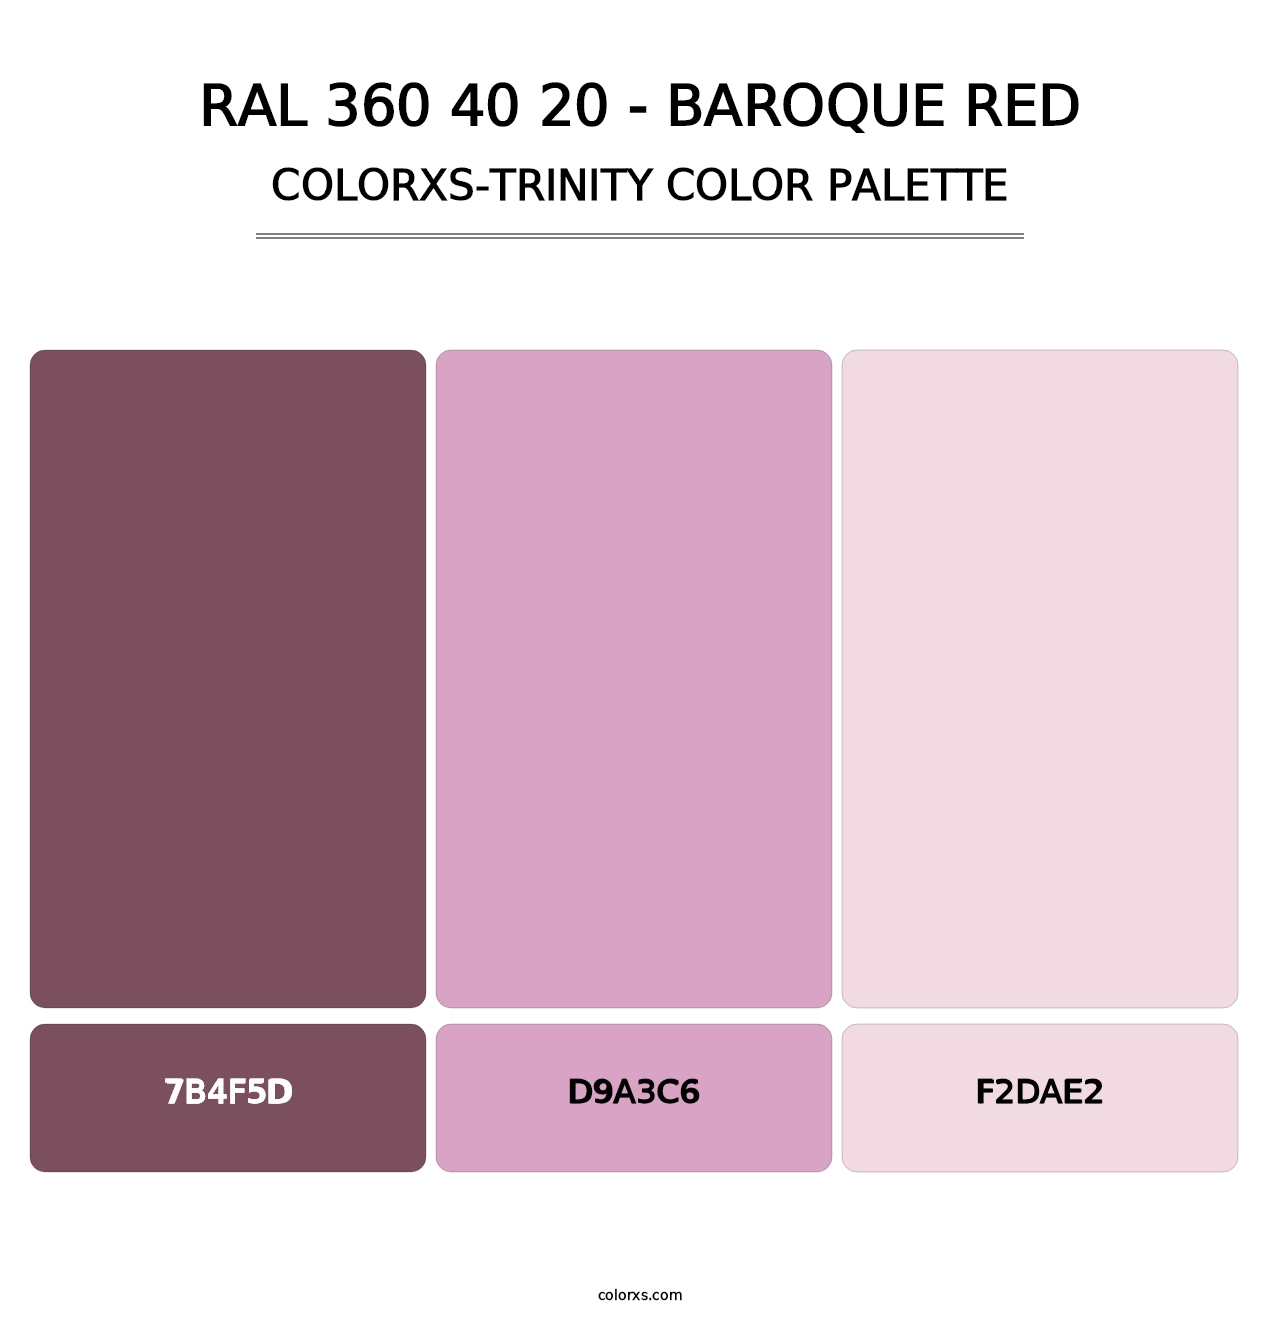 RAL 360 40 20 - Baroque Red - Colorxs Trinity Palette